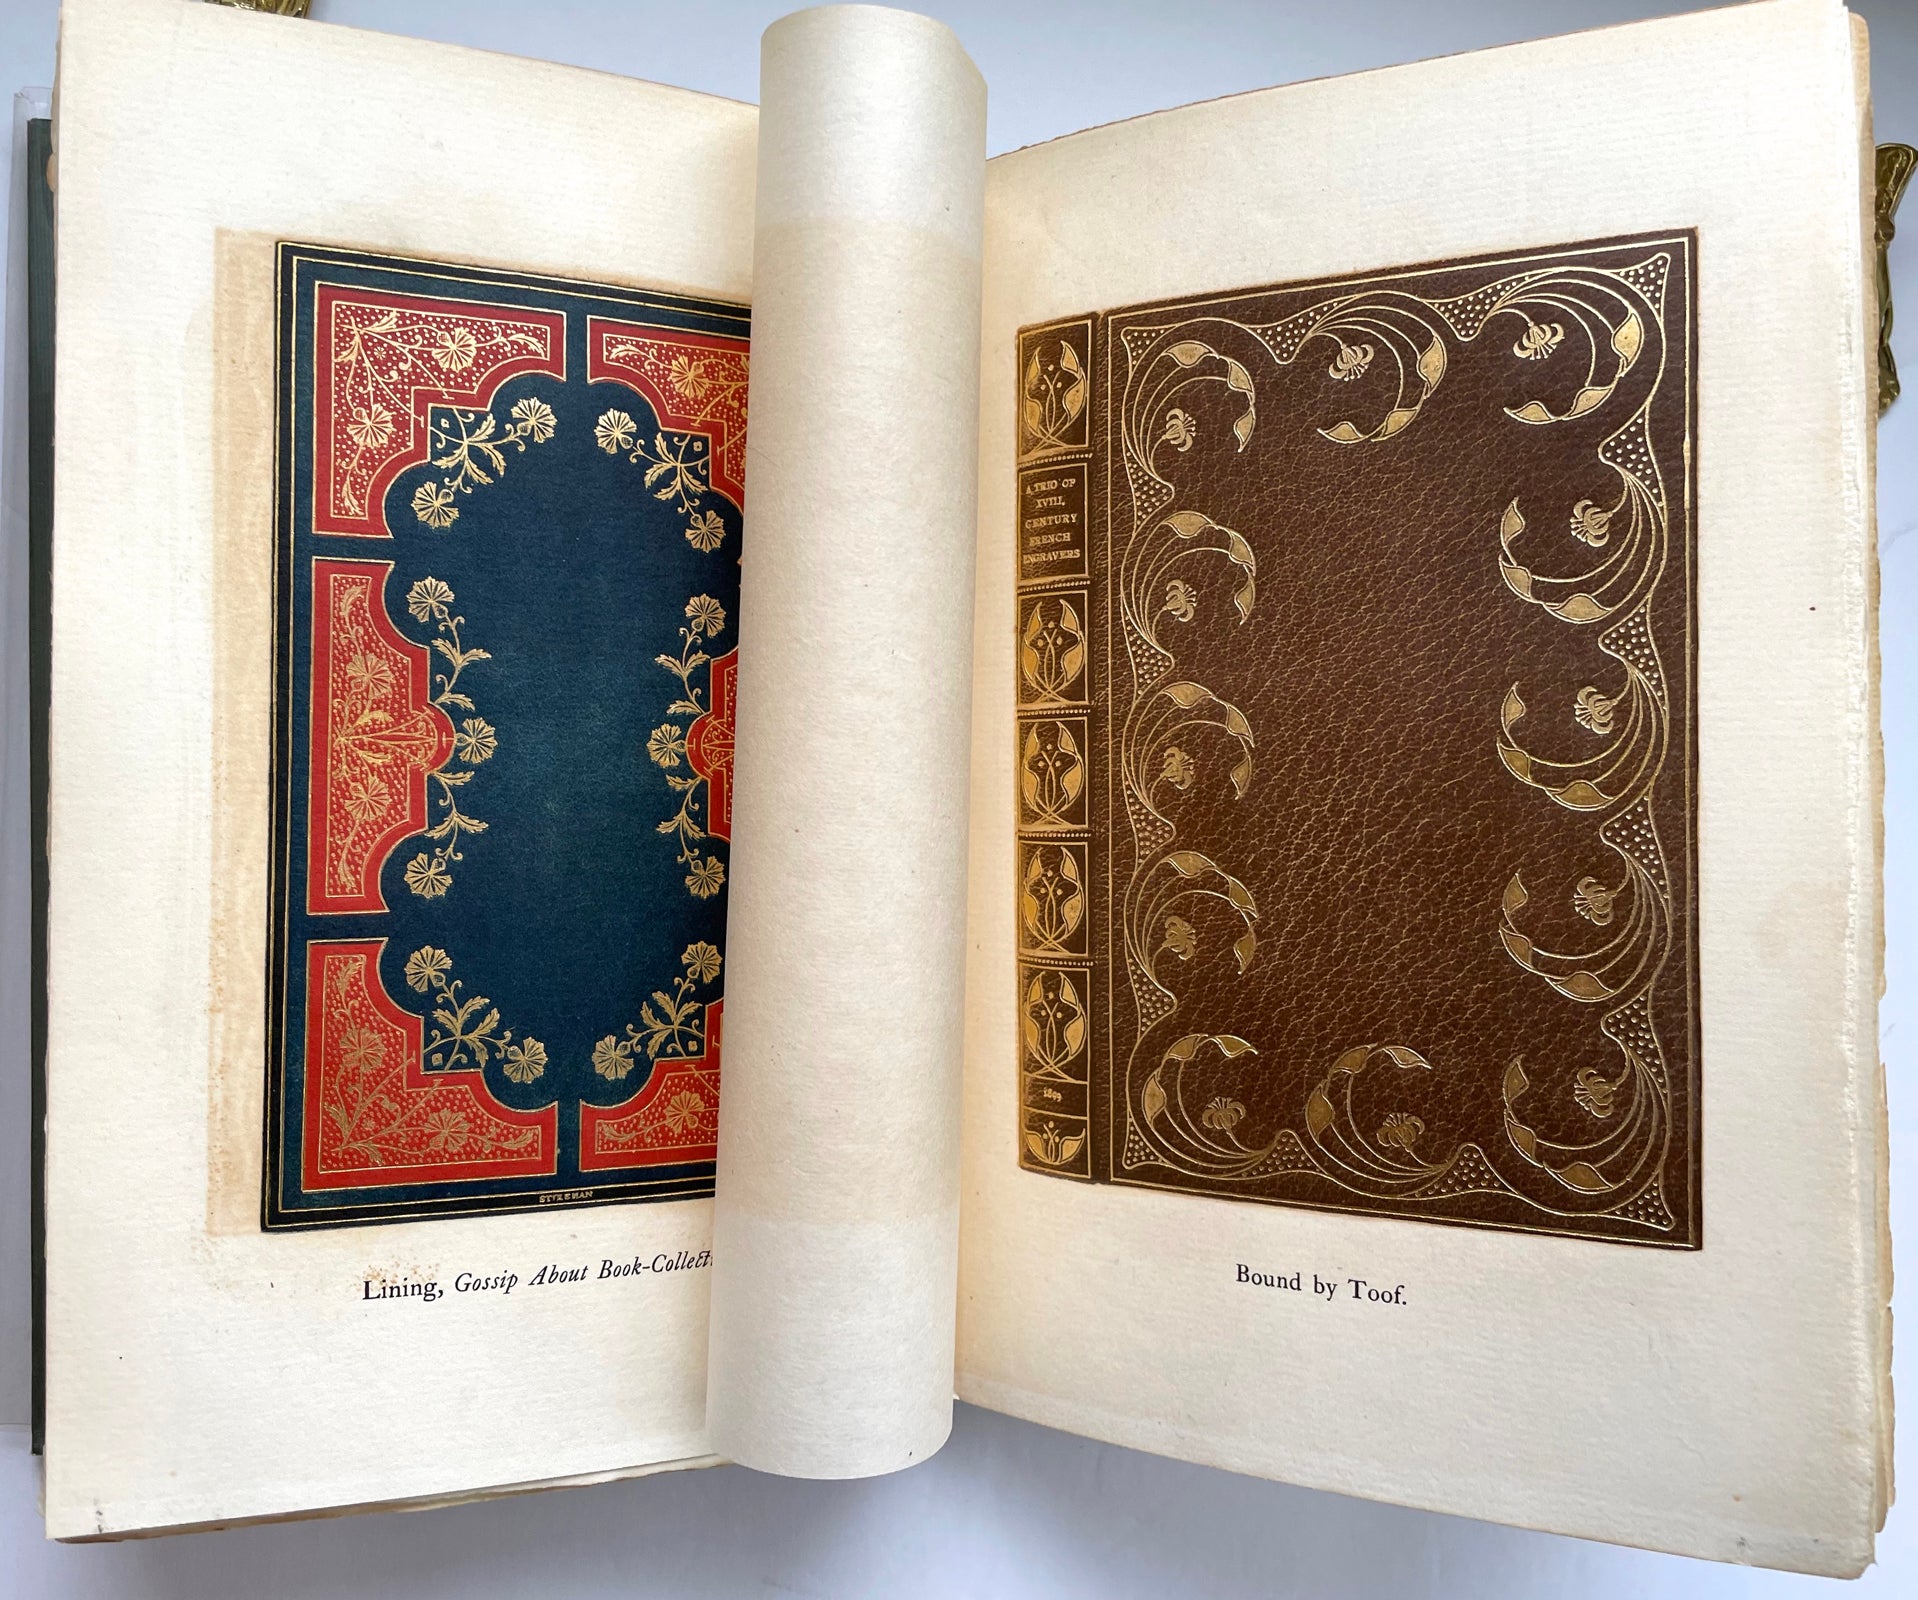 AMERICAN BOOK-BINDINGS IN THE LIBRARY OF HENRY W. POOR. Illustrated in Gold-Leaf and Colours by Edward Bierstadt.